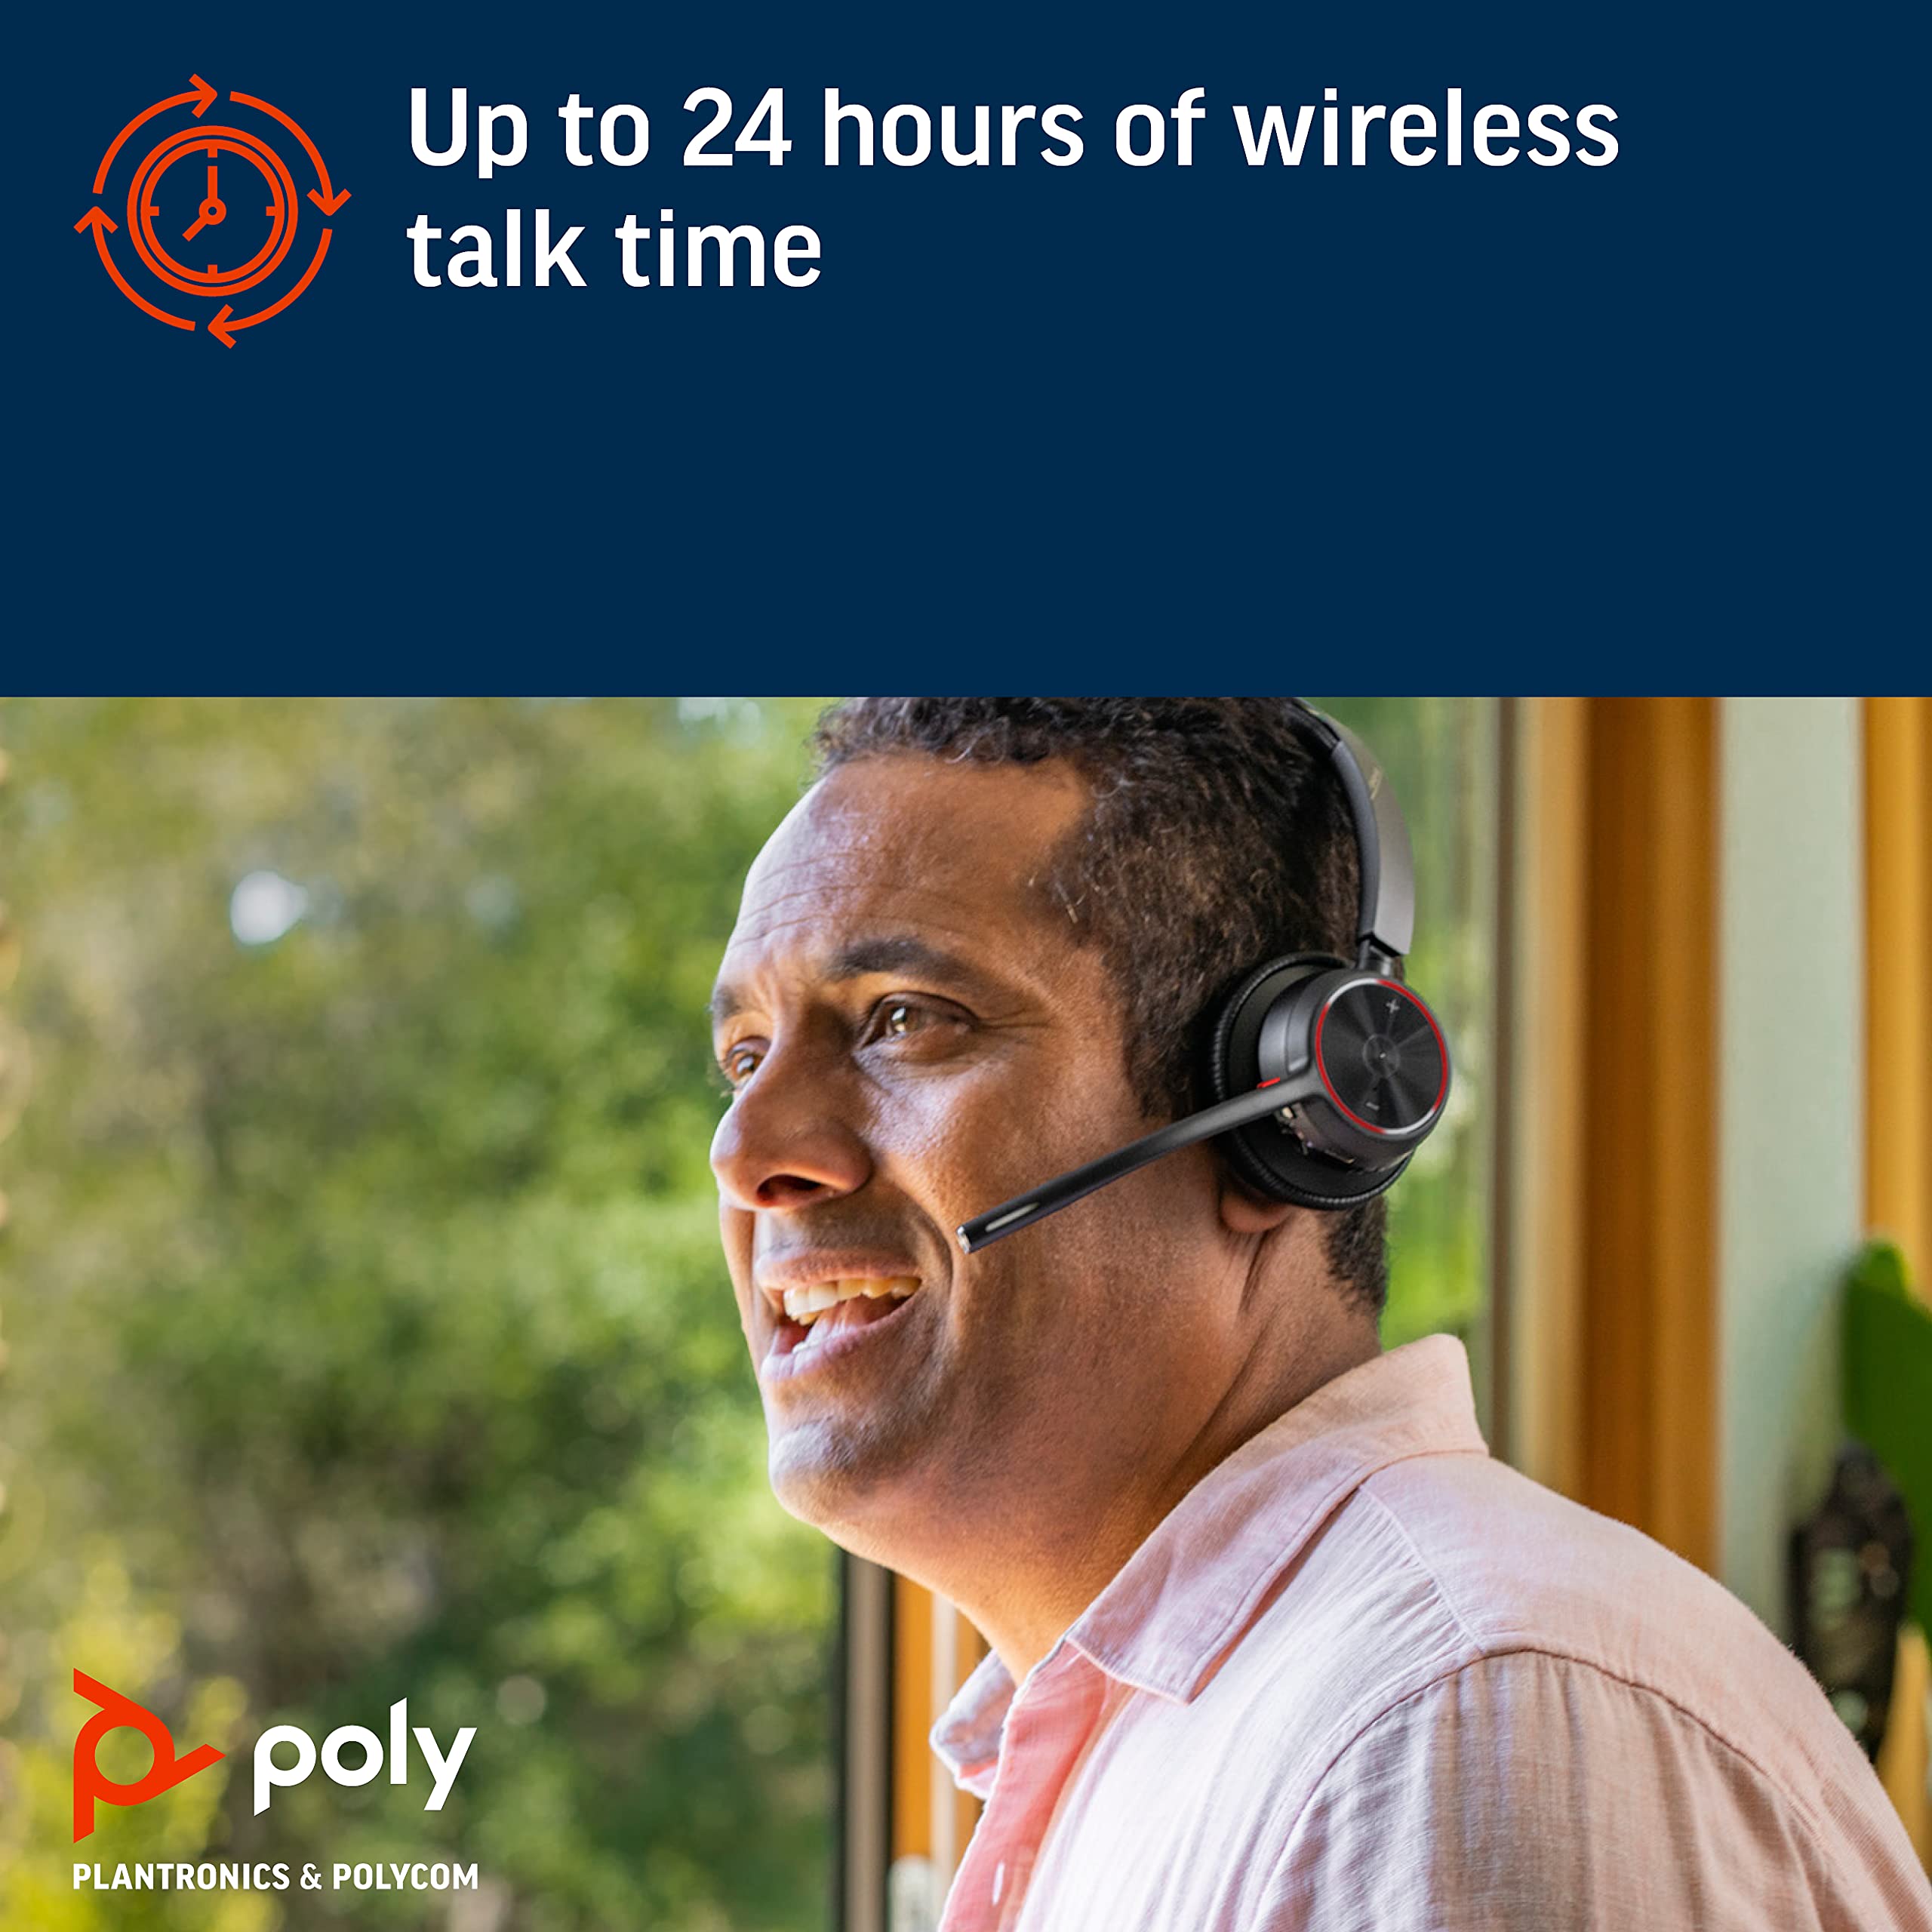 Poly - Voyager 4310 UC Wireless Headset (Plantronics) - Single-Ear Headset with Boom Mic - Connect to PC/Mac via USB-C Bluetooth Adapter, Cell Phone via Bluetooth - Works with Teams, Zoom & More